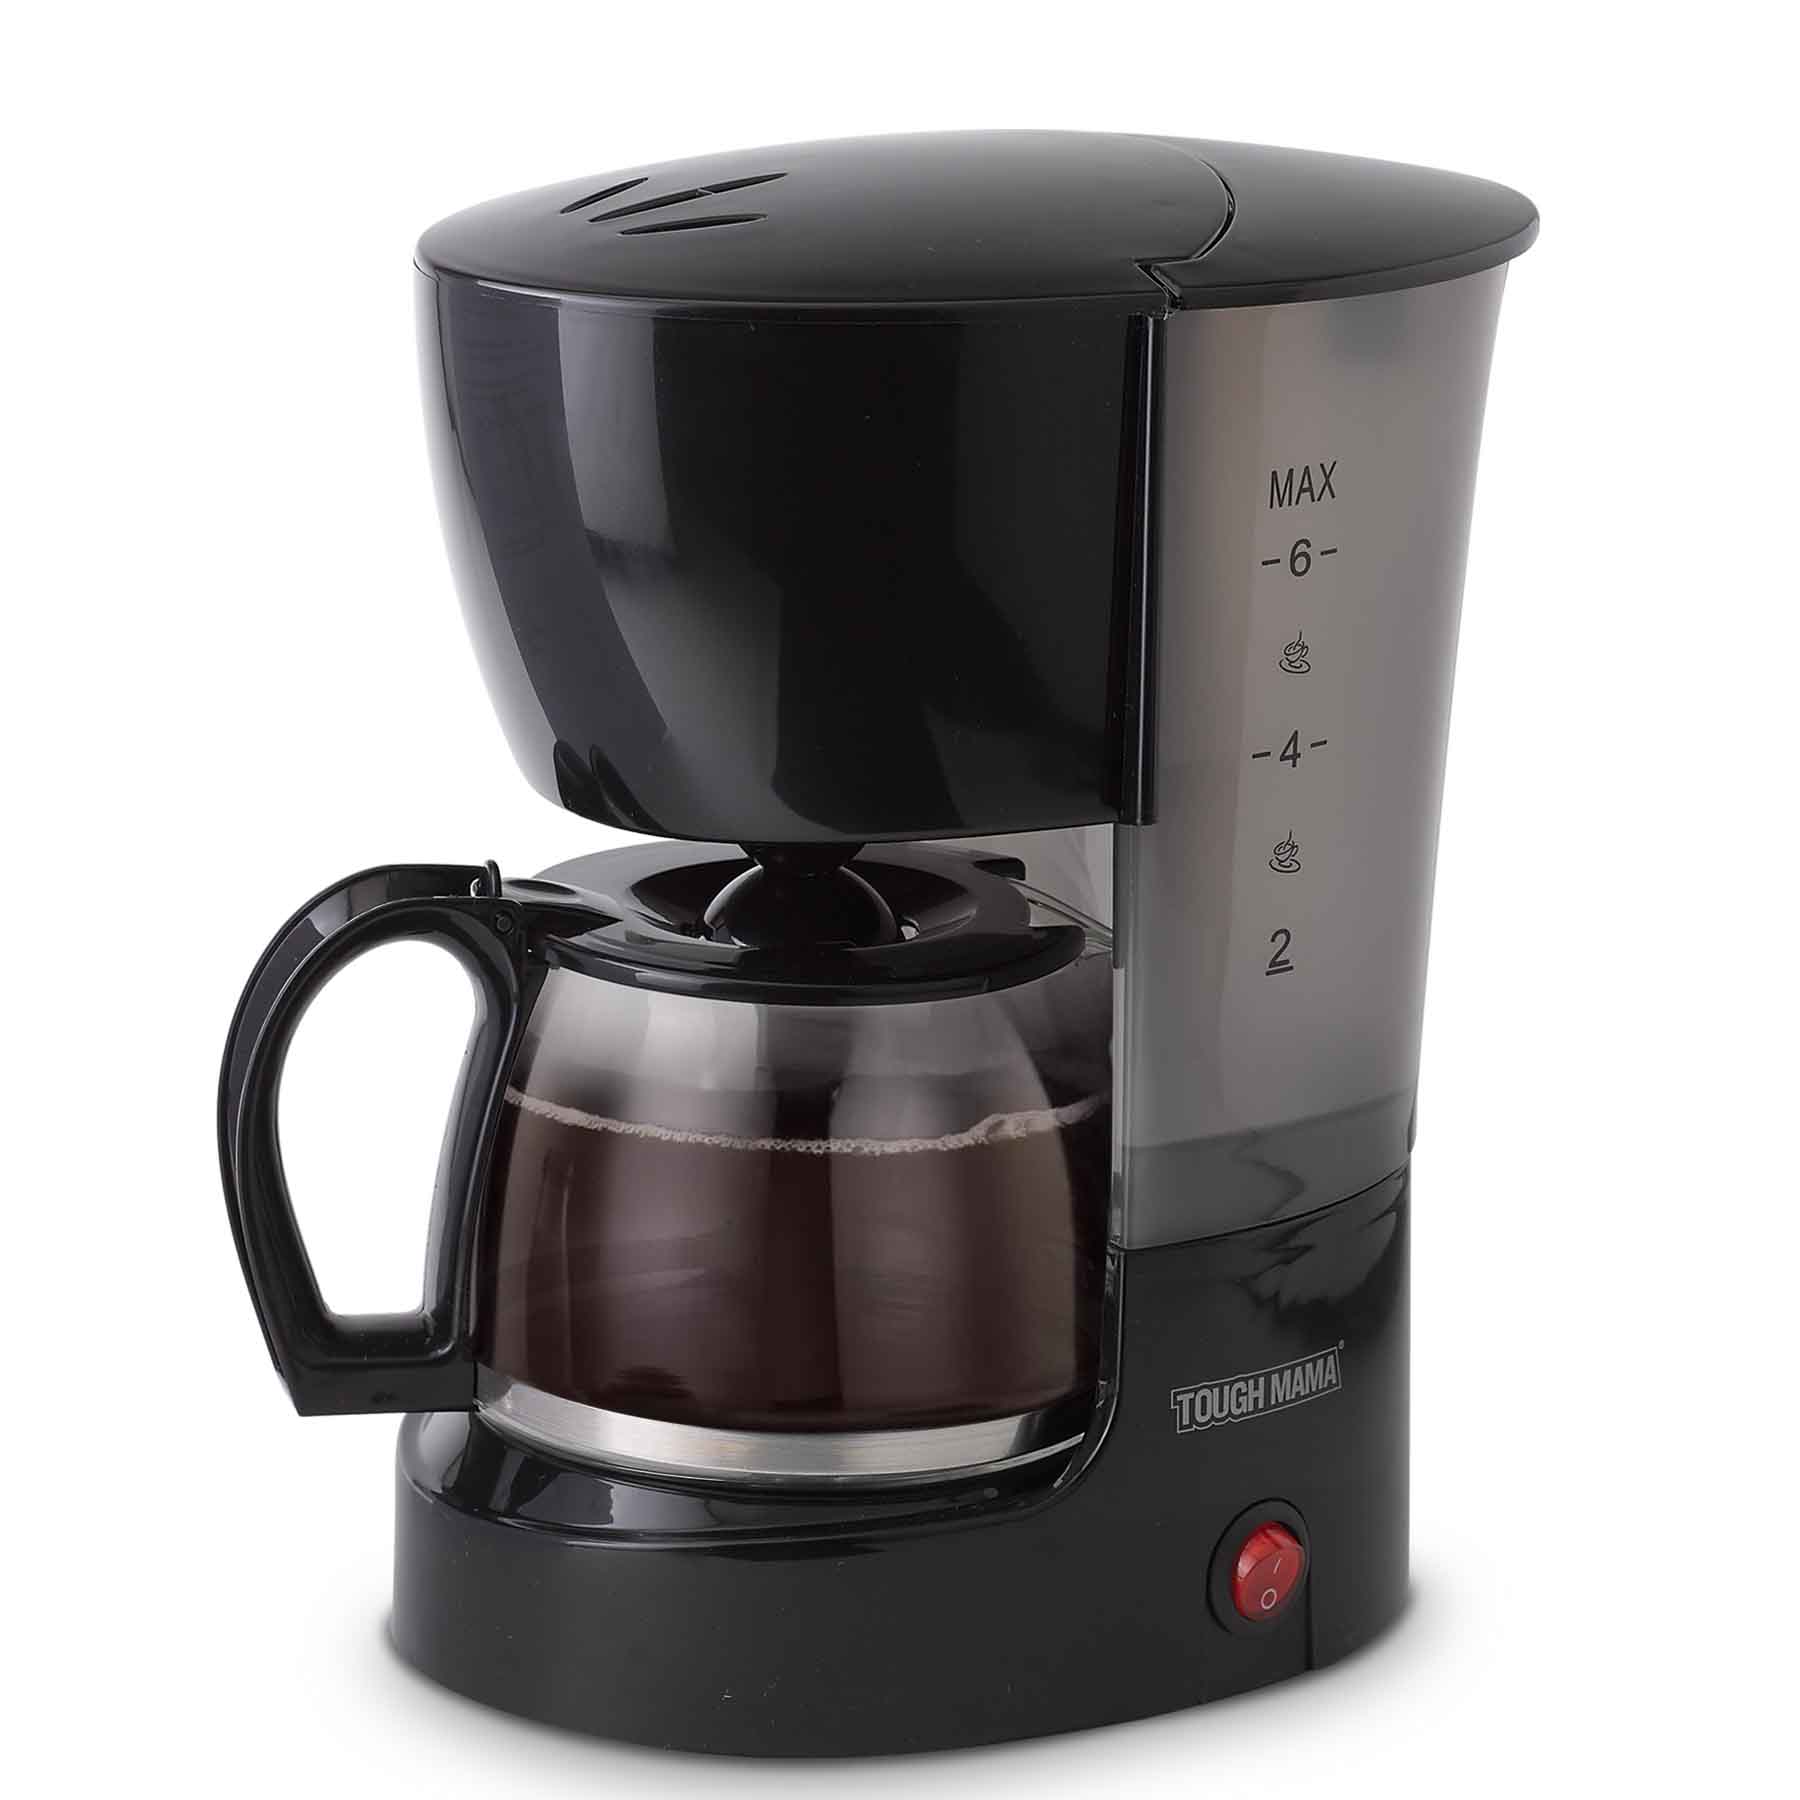 https://toughmamaappliances.com/wp-content/uploads/2019/11/NTMCM-660-with-coffee.jpg